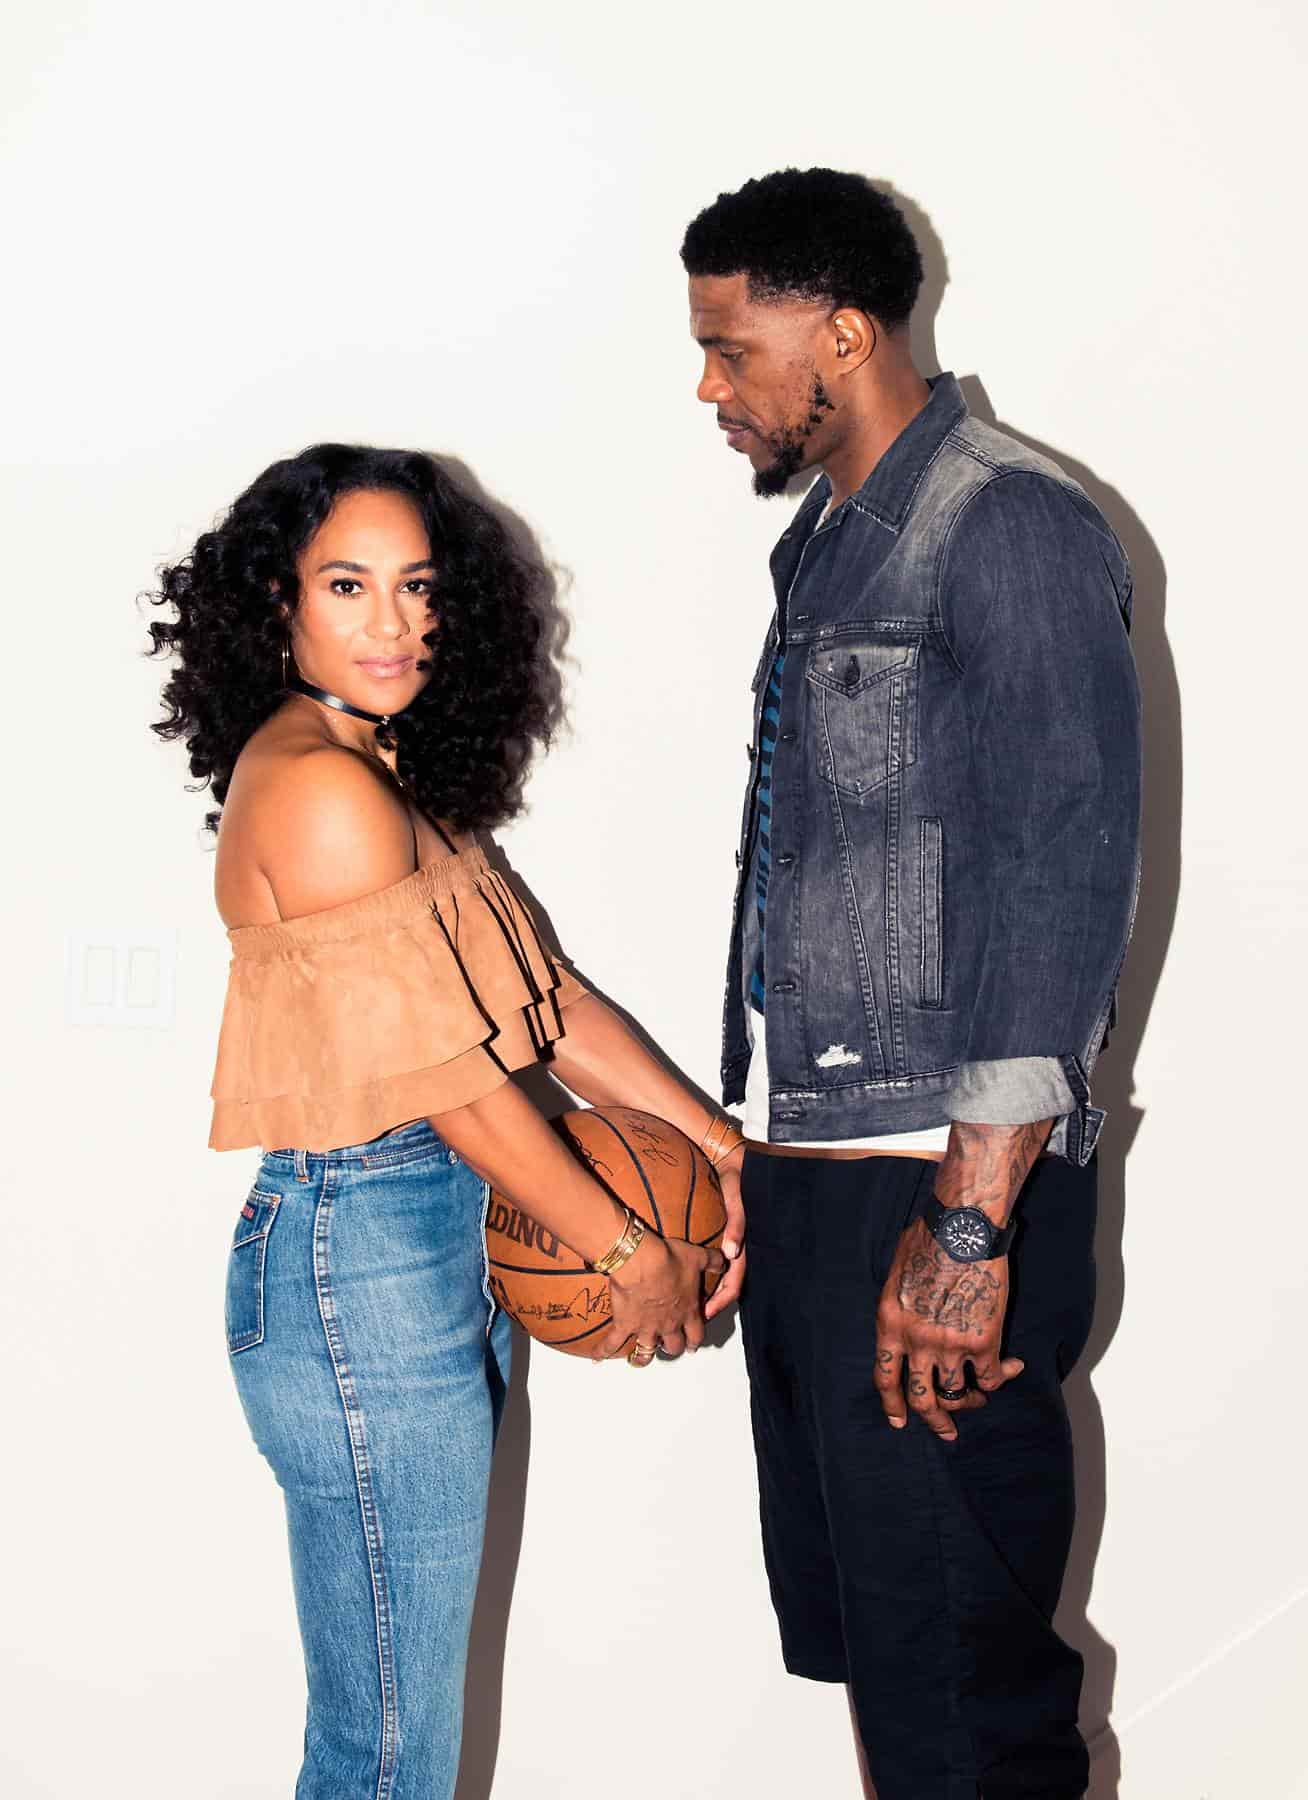 Image of Udonis Haslem with his wife, Faith Rein-Haslem